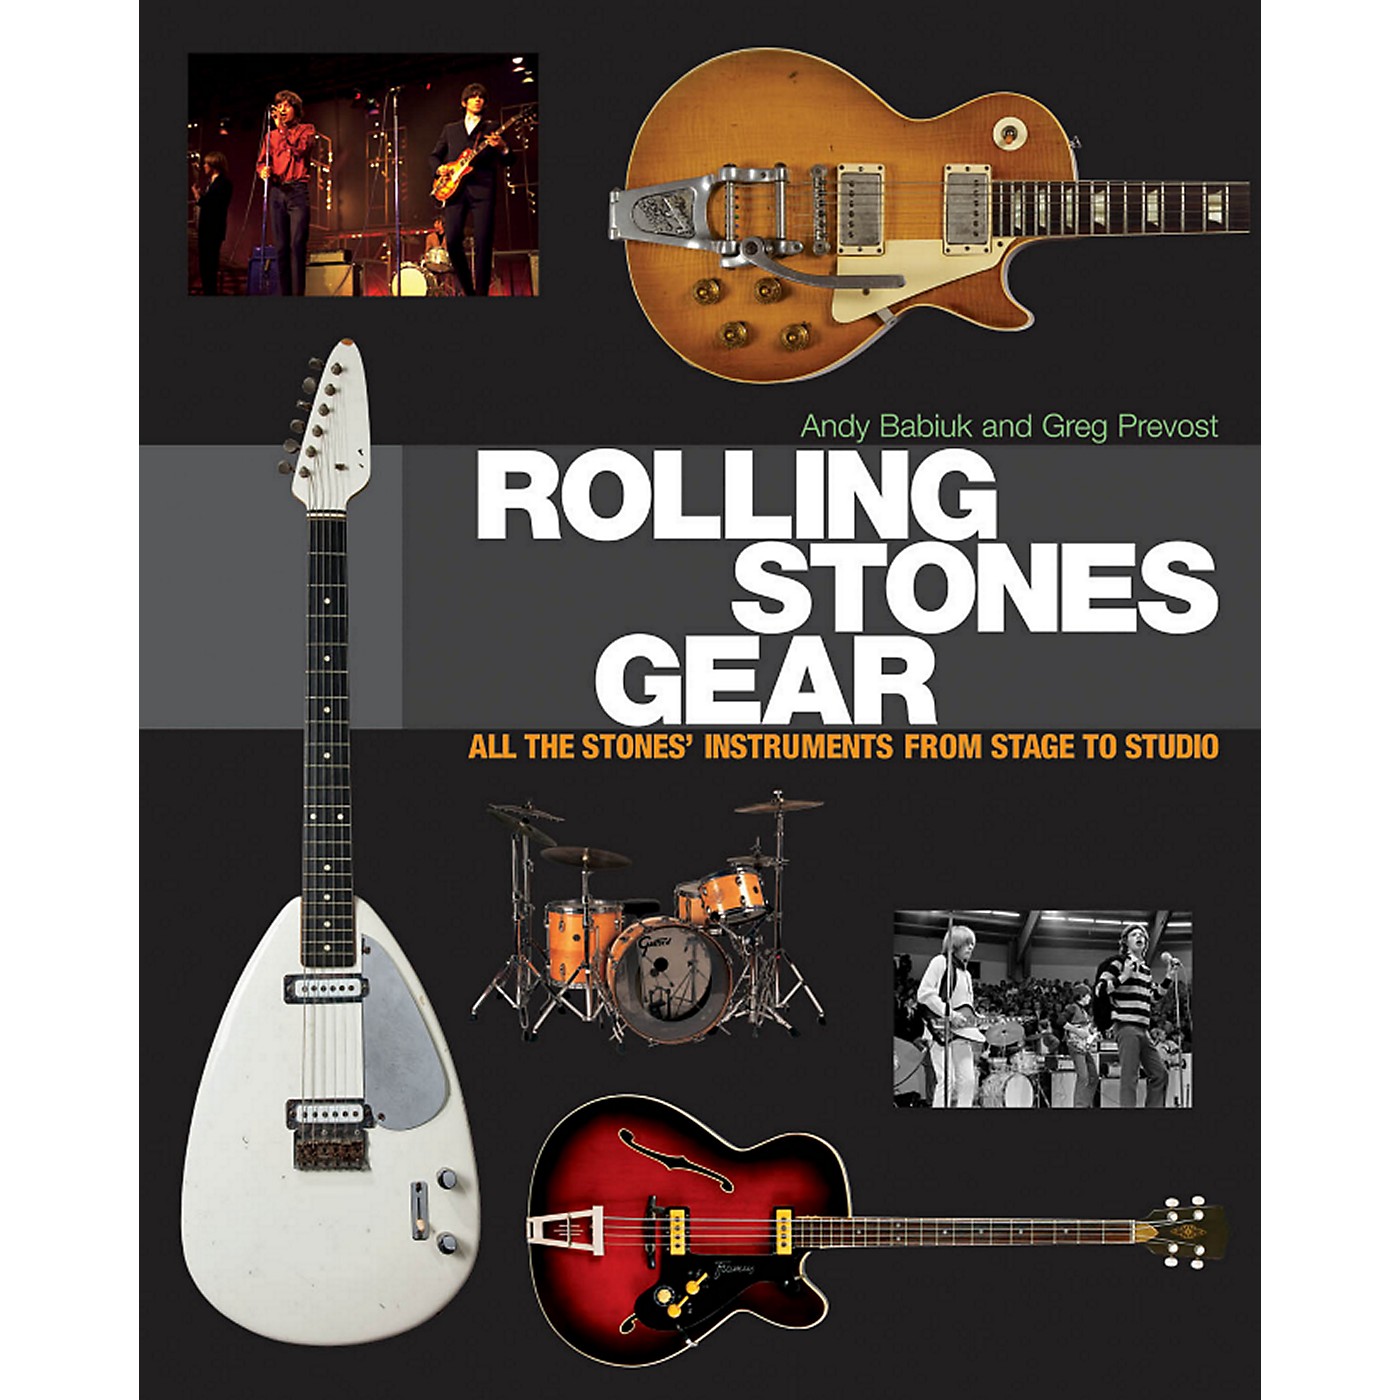 Hal Leonard Rolling Stones Gear - All The Stones' Instruments From Stage To Studio thumbnail